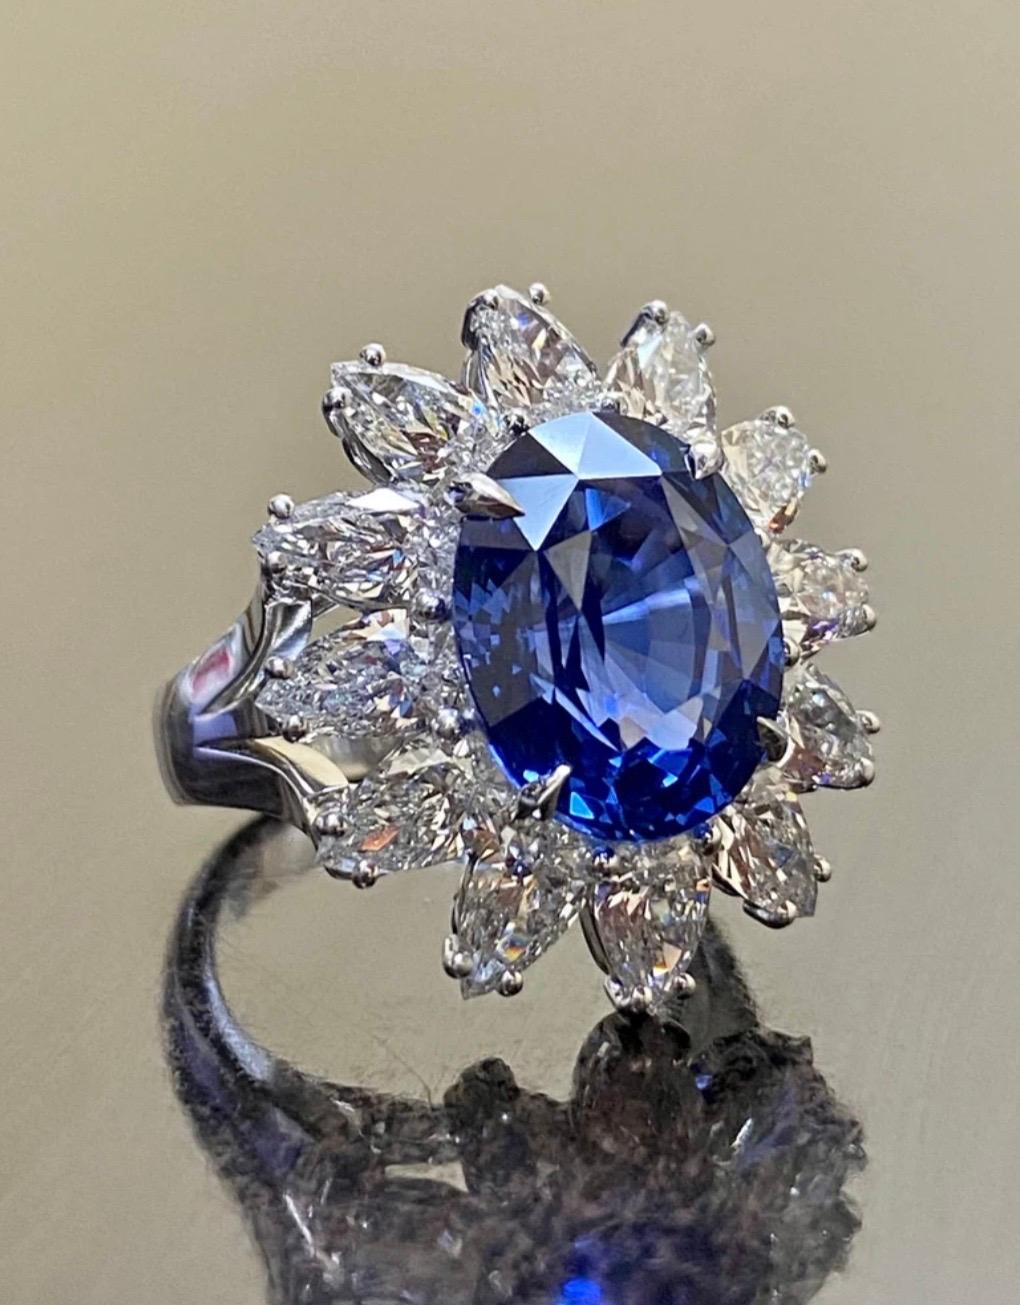 Platinum Art Deco Pear Shape Diamond 8.59 Carat Blue Sapphire Engagement Ring In New Condition For Sale In Los Angeles, CA